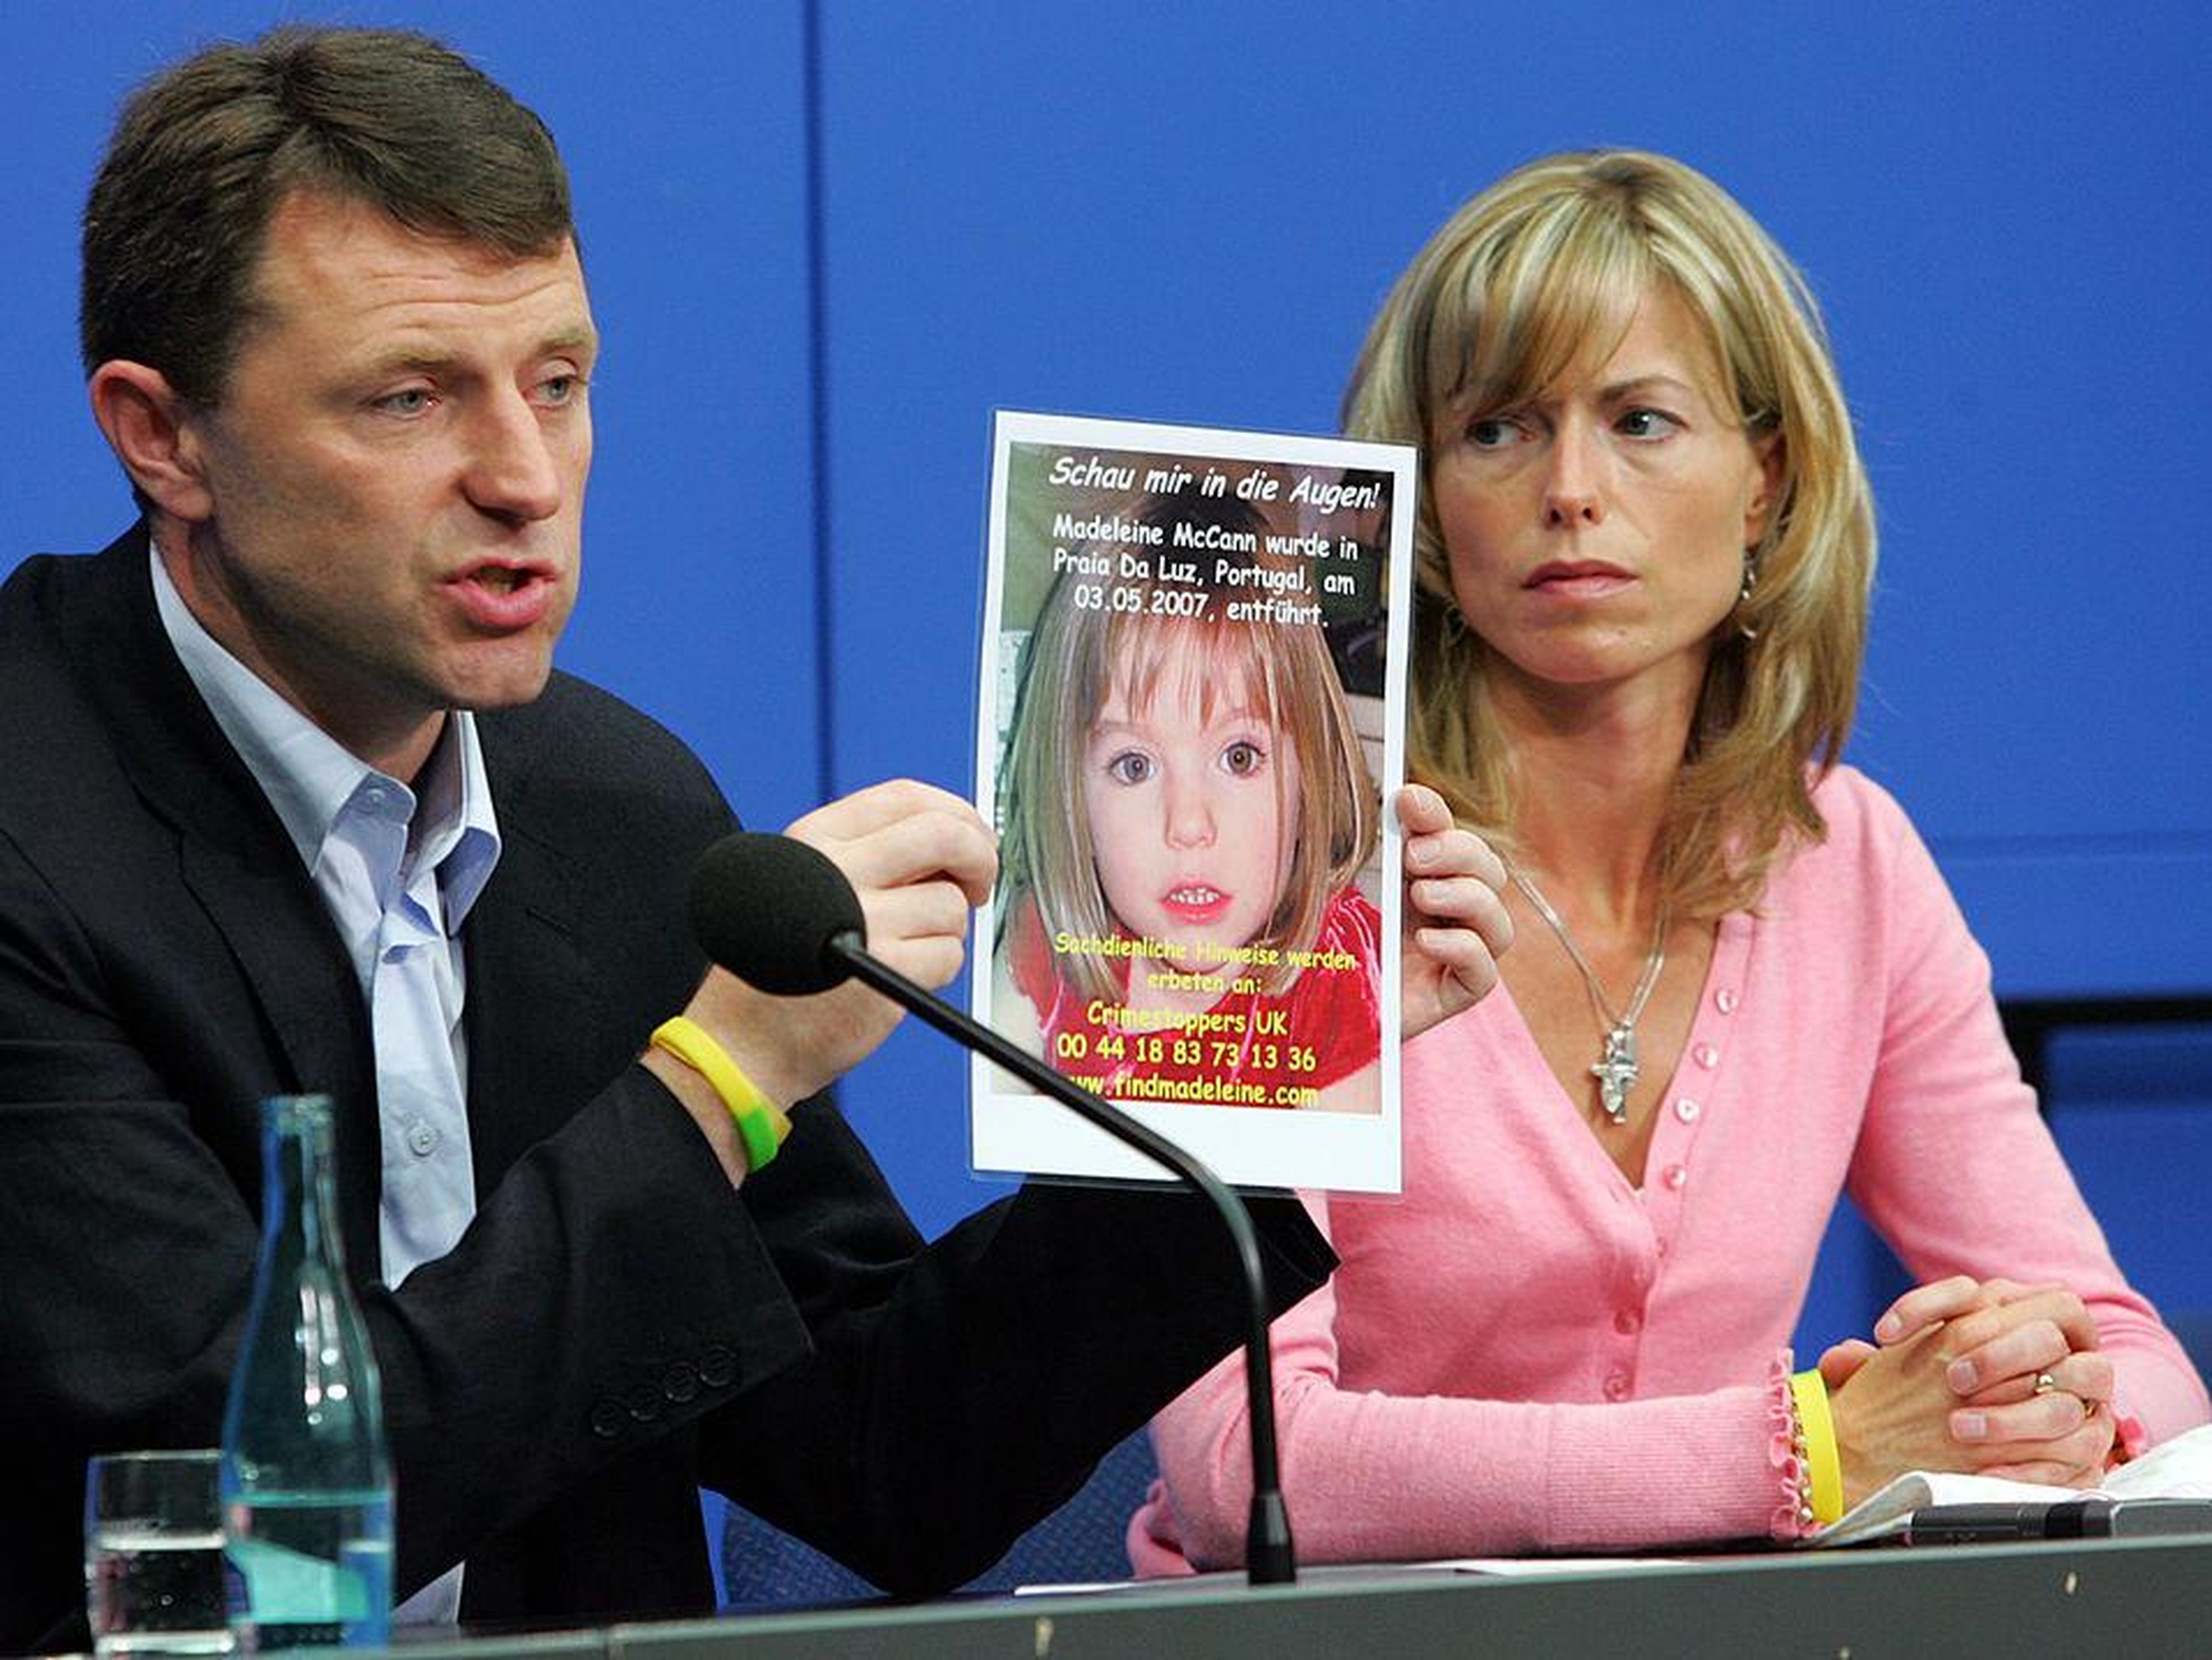 Gerry McCann and Kate McCann are still searching for their daughter.